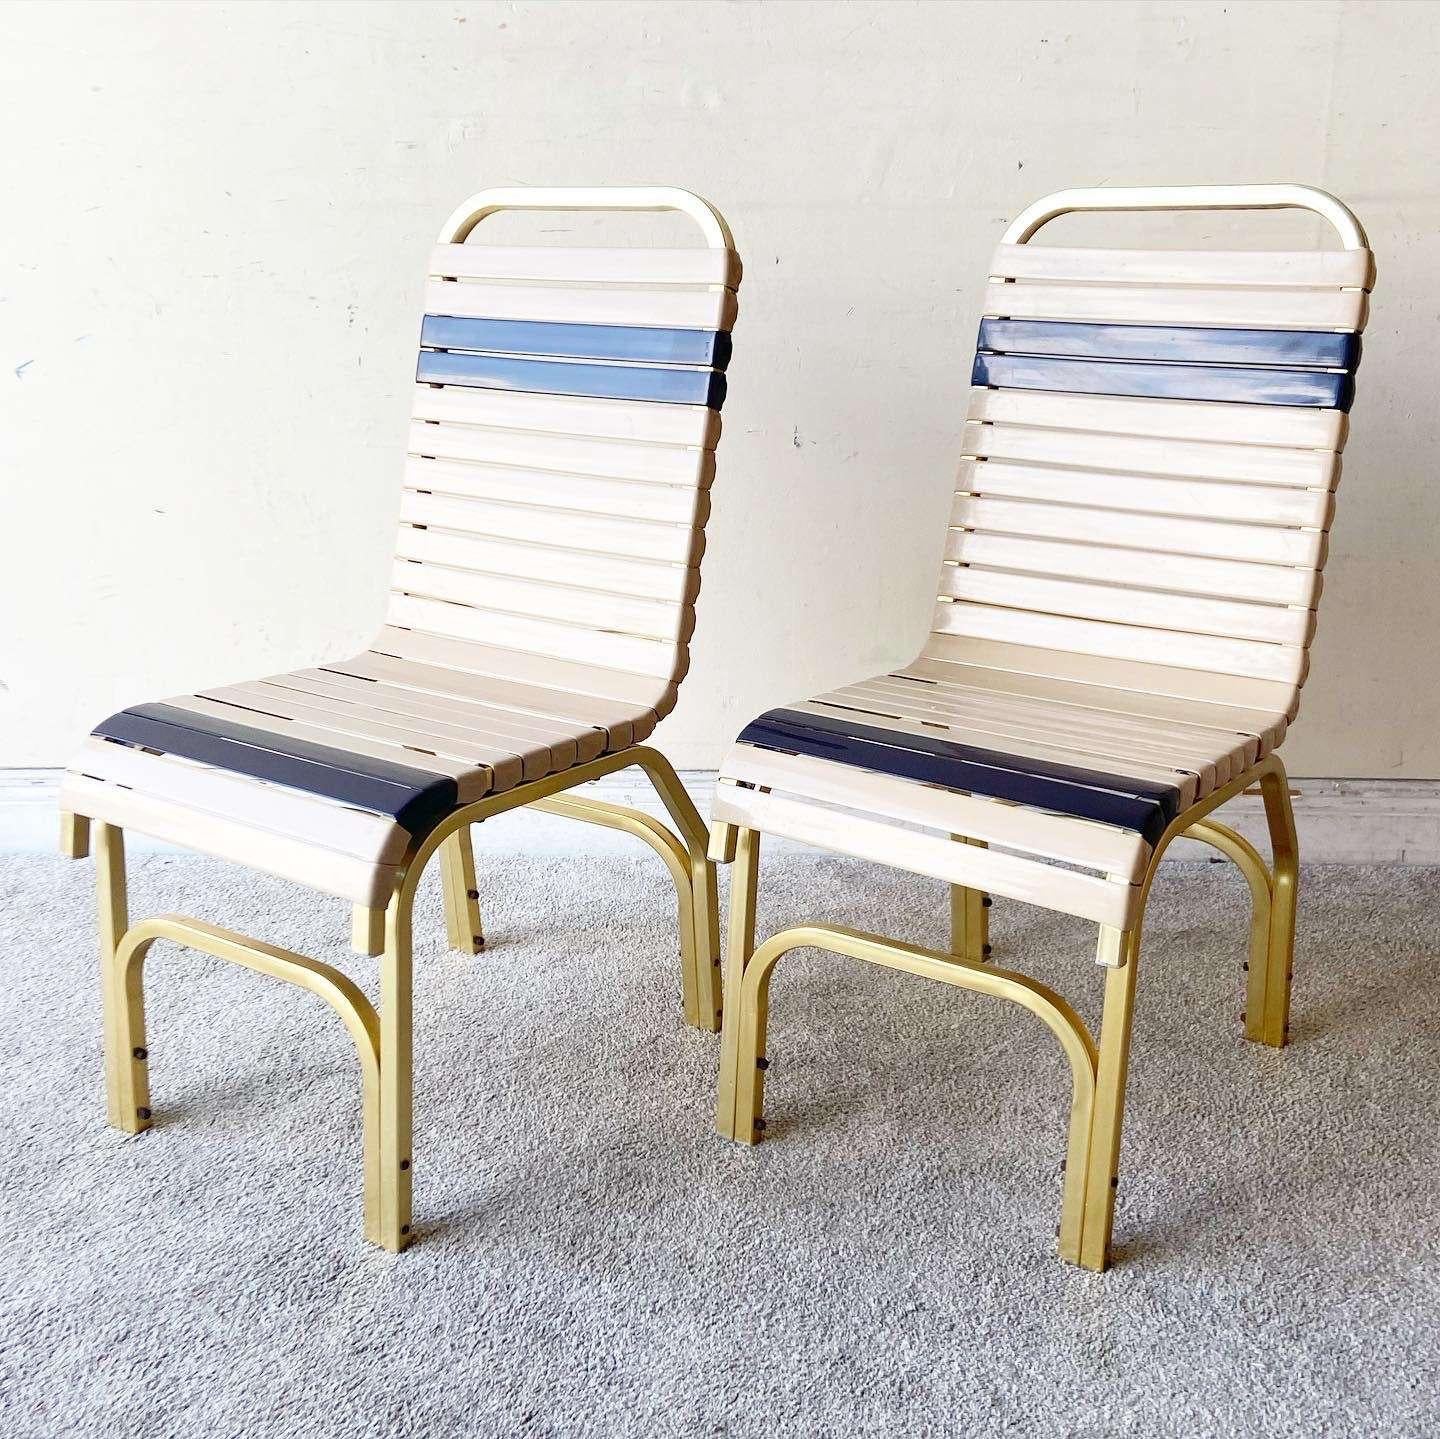 Wonderful vintage mid century modern Miami poolside pair of chairs with table. The chairs and table have an aluminum metal frame. Table features a fiberglass top and chairs have rubber strap seat and back rests.